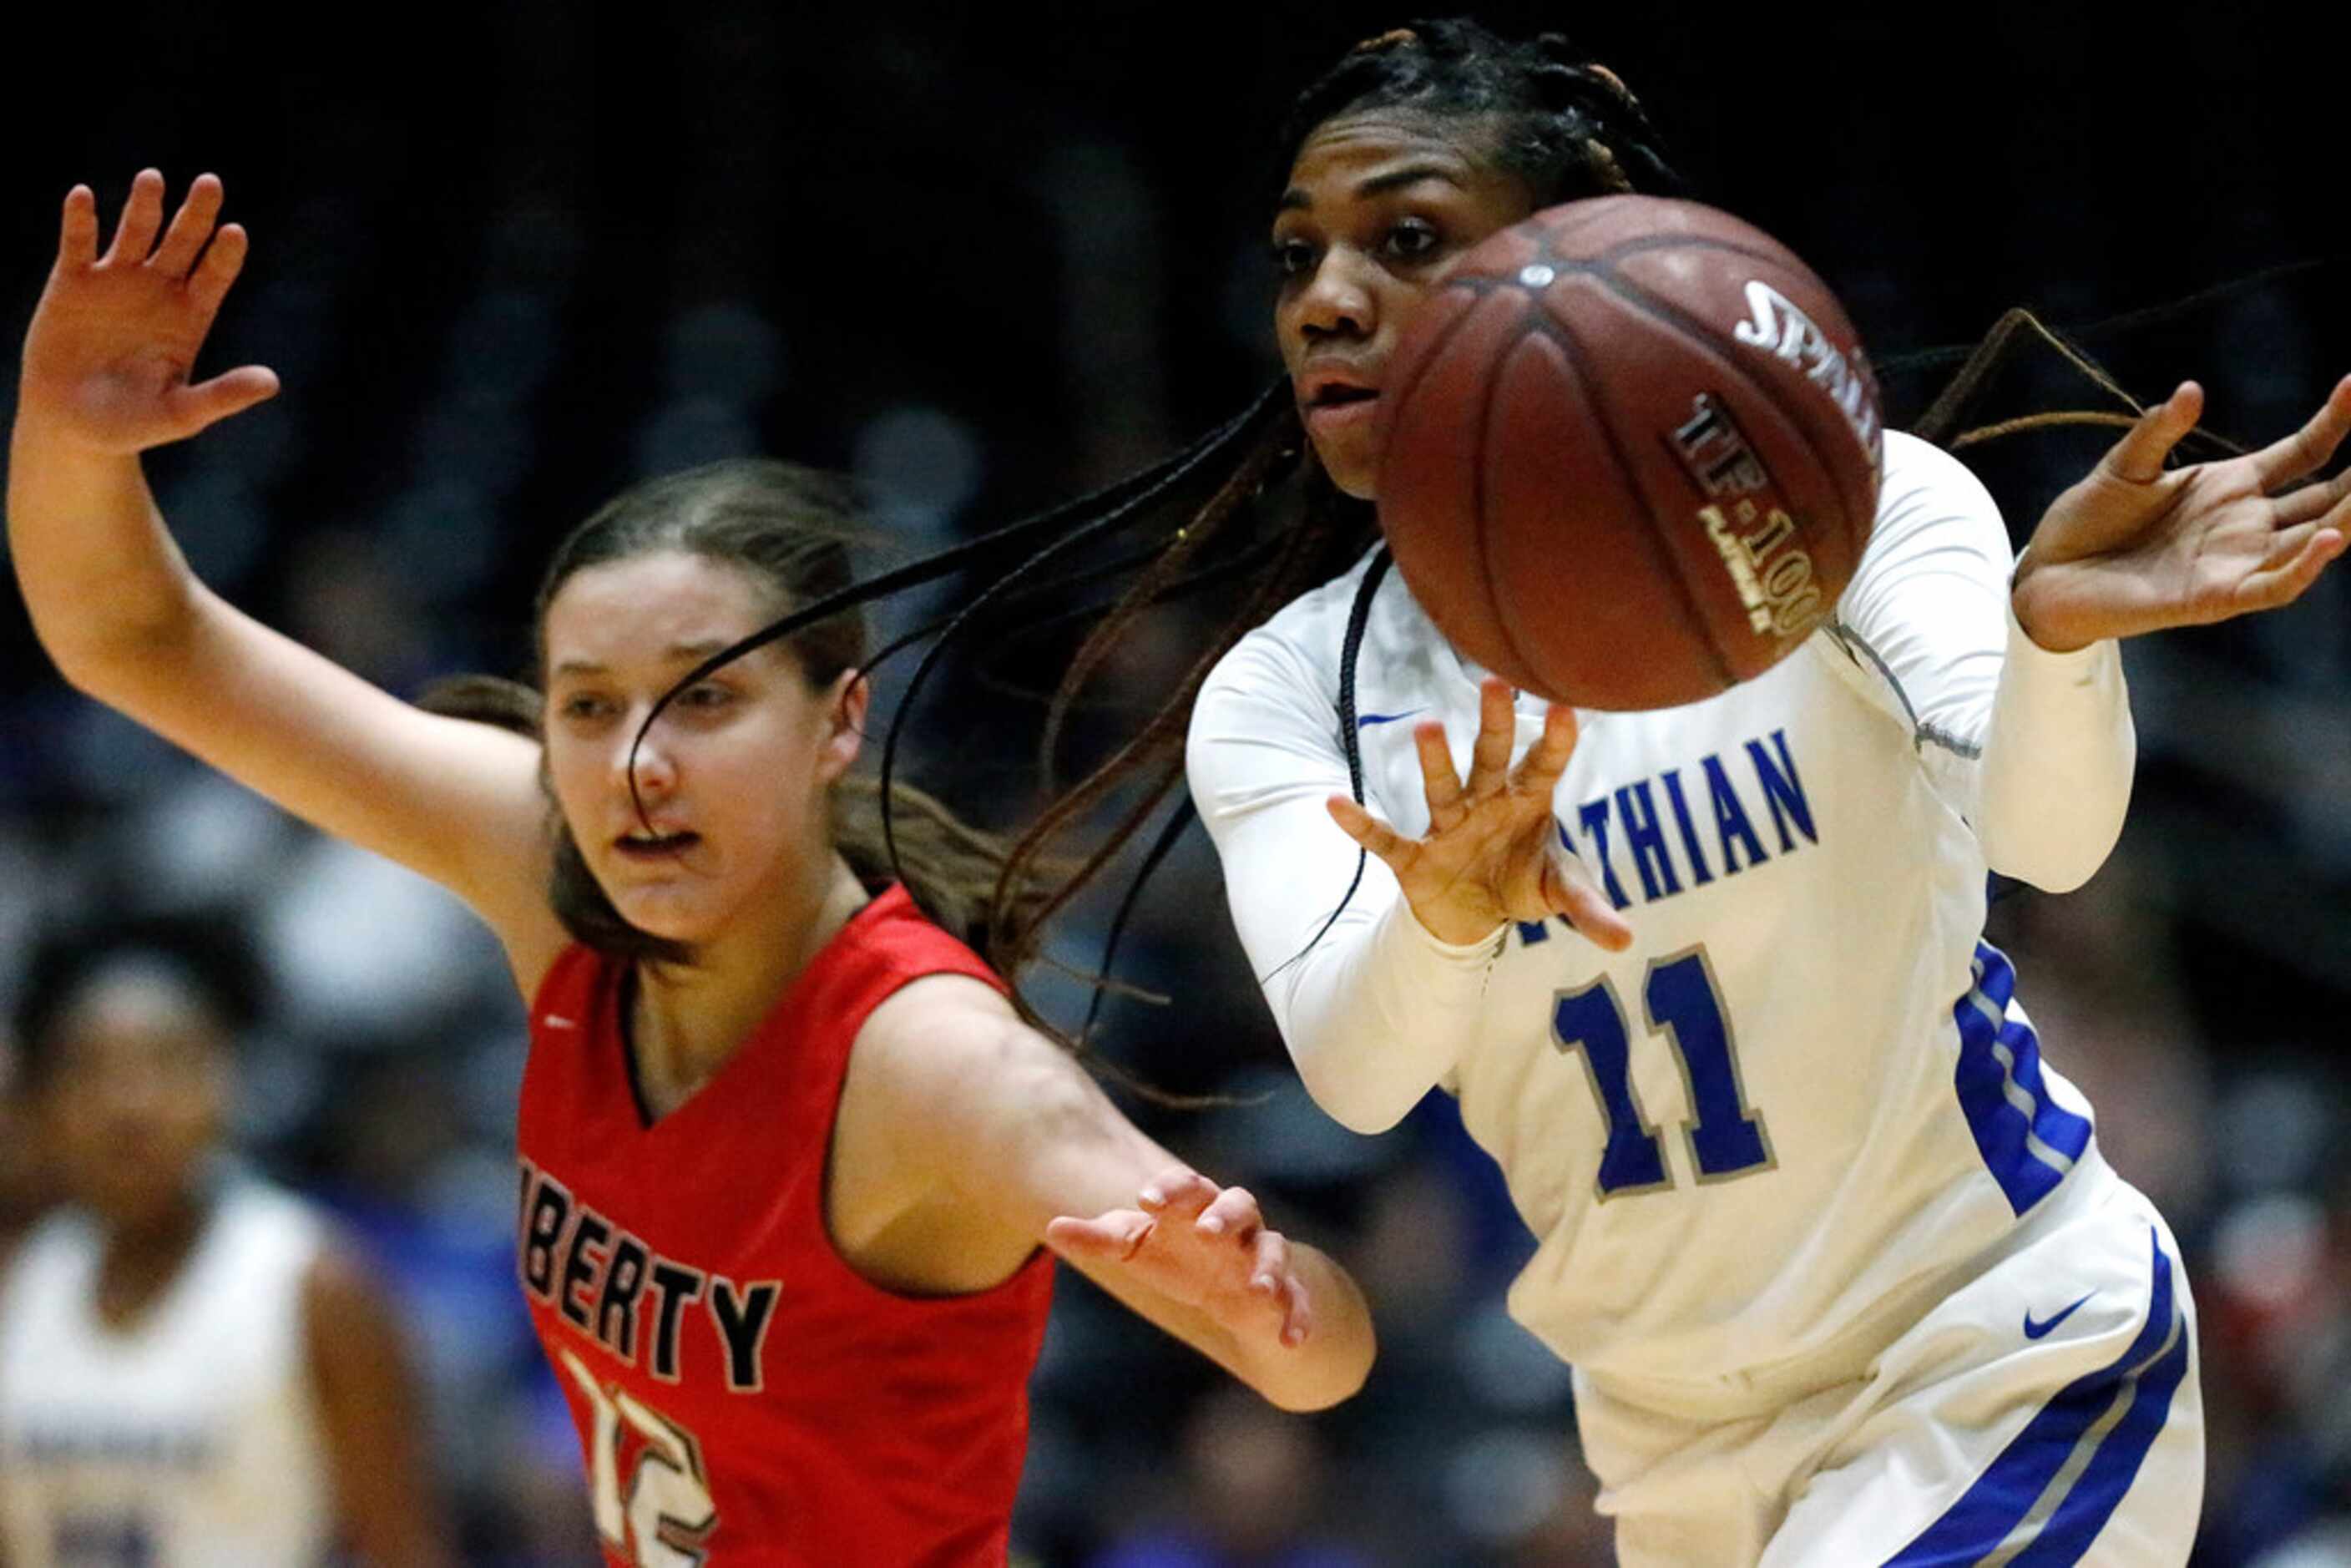 Midlothian High School guard Maykayla Jackson (11) passes the ball in overtime while Frisco...